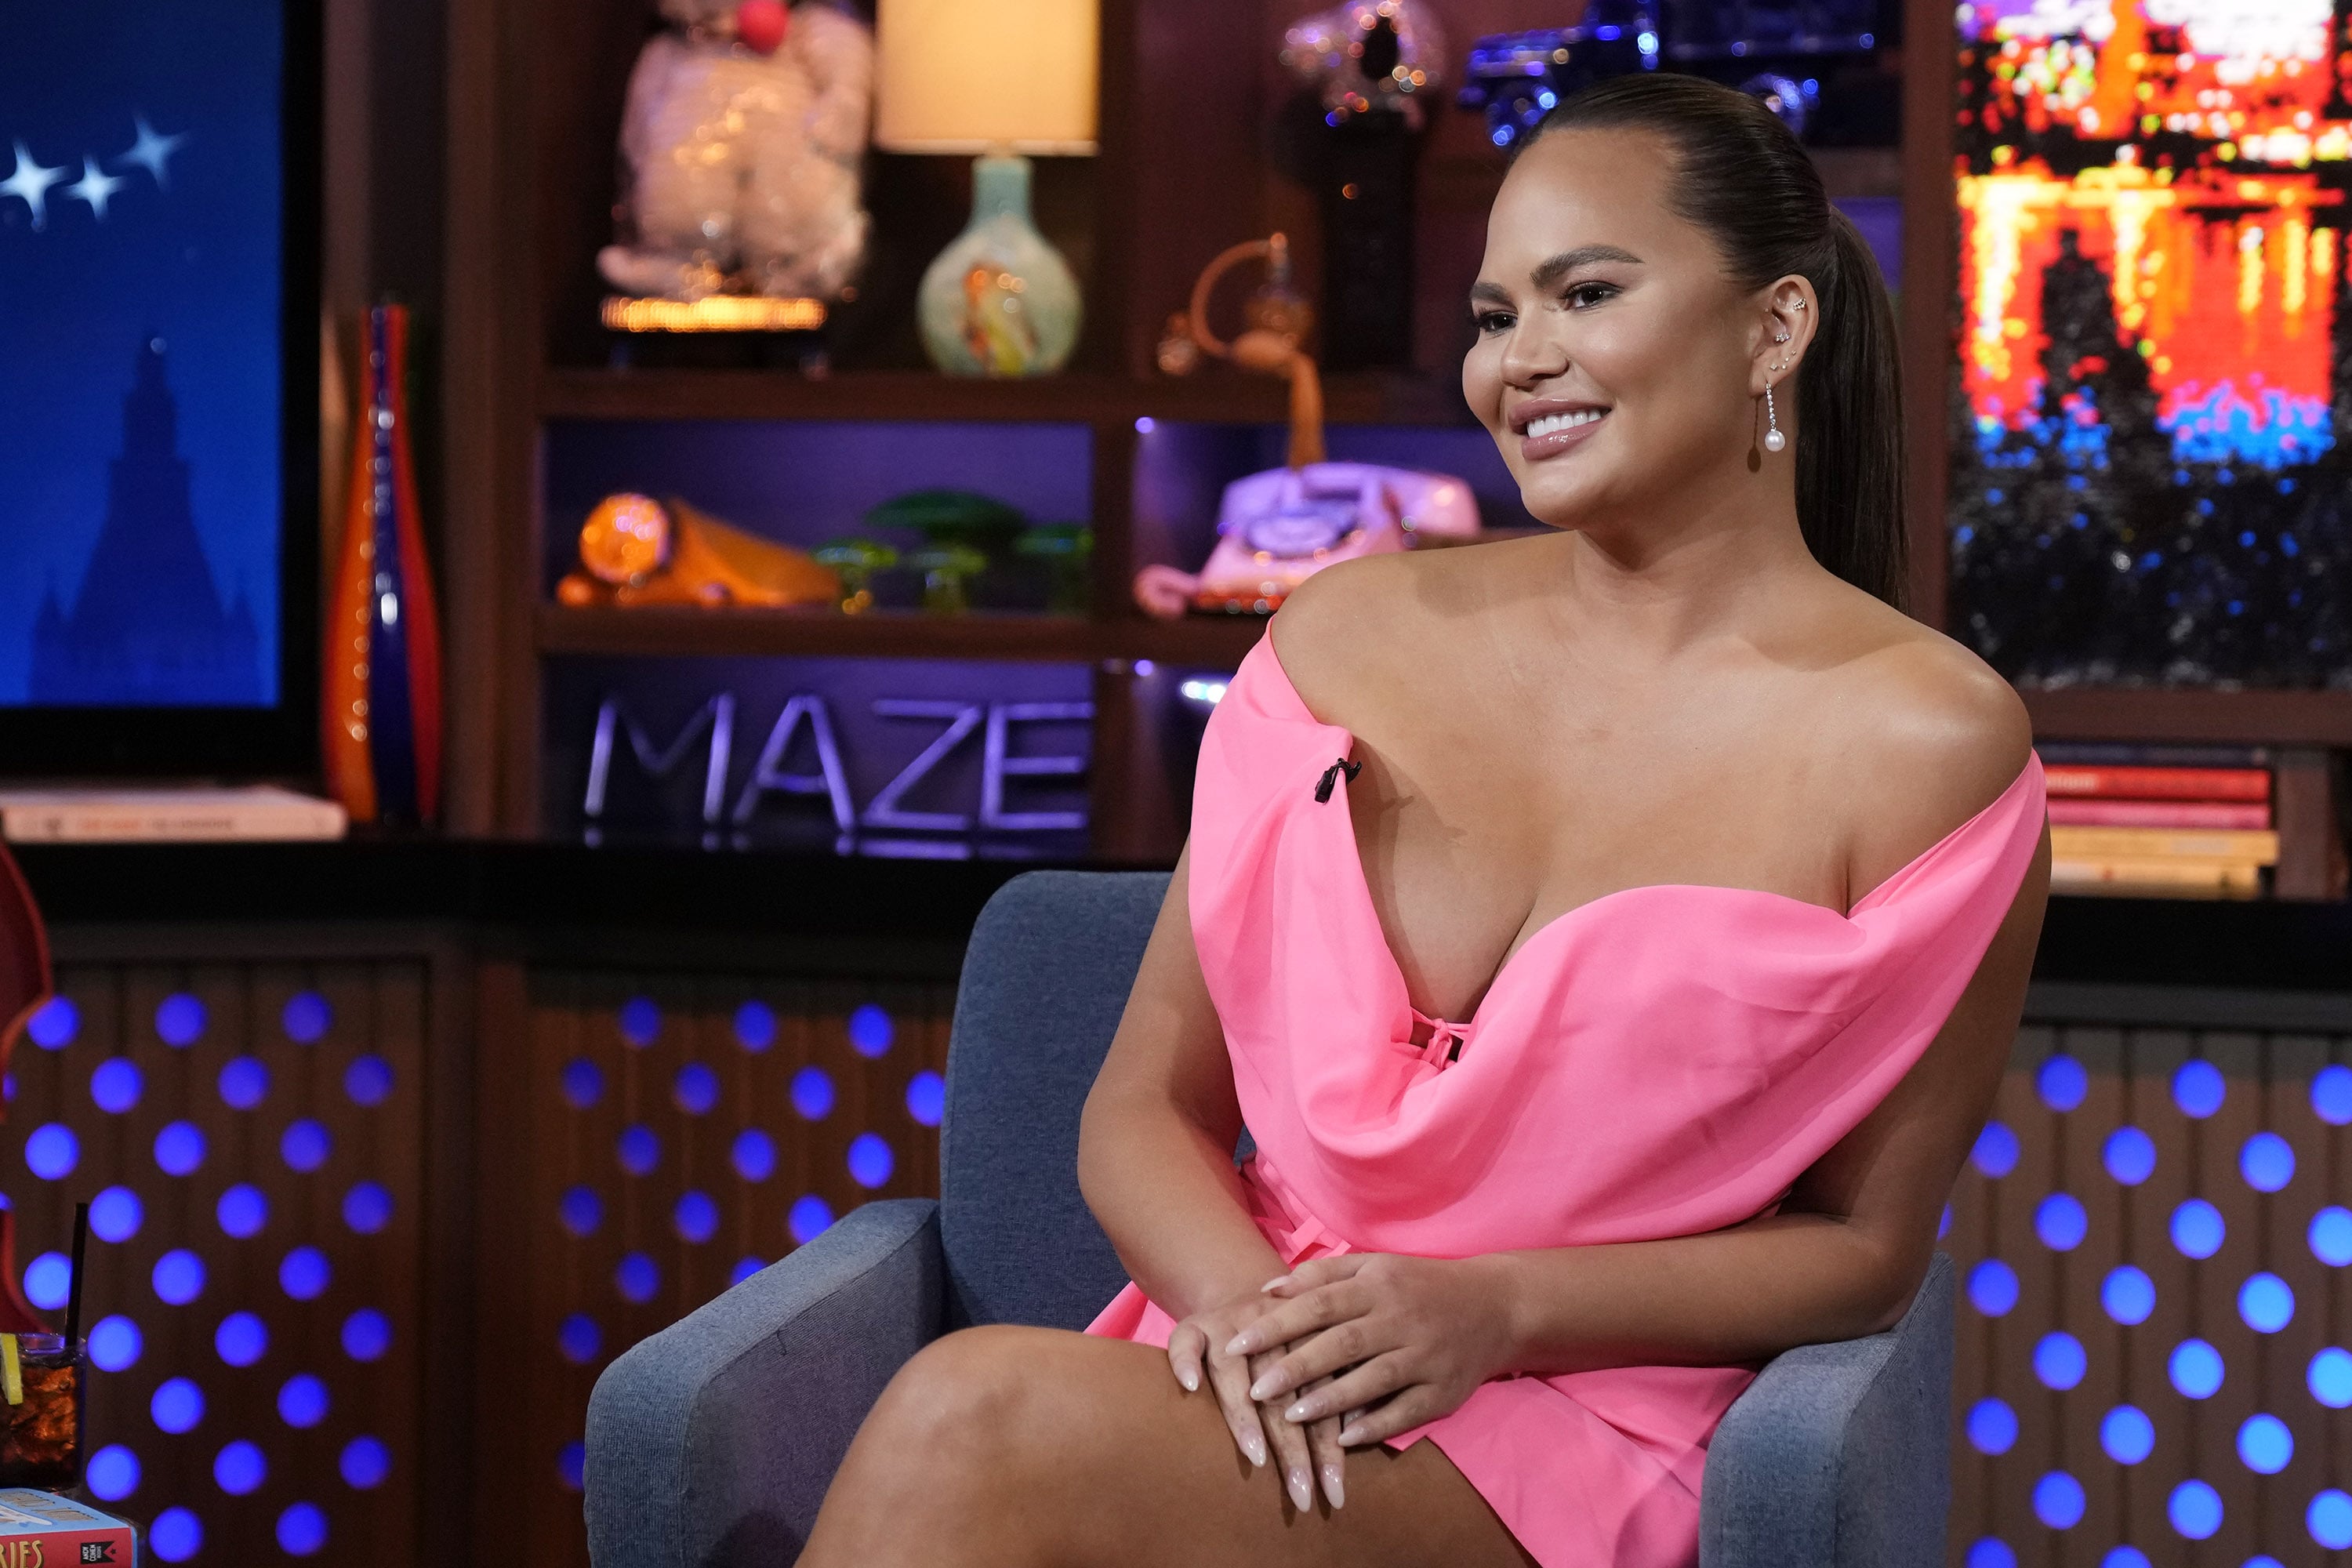 Chrissy Teigen has one breast larger than the other, Celebrities